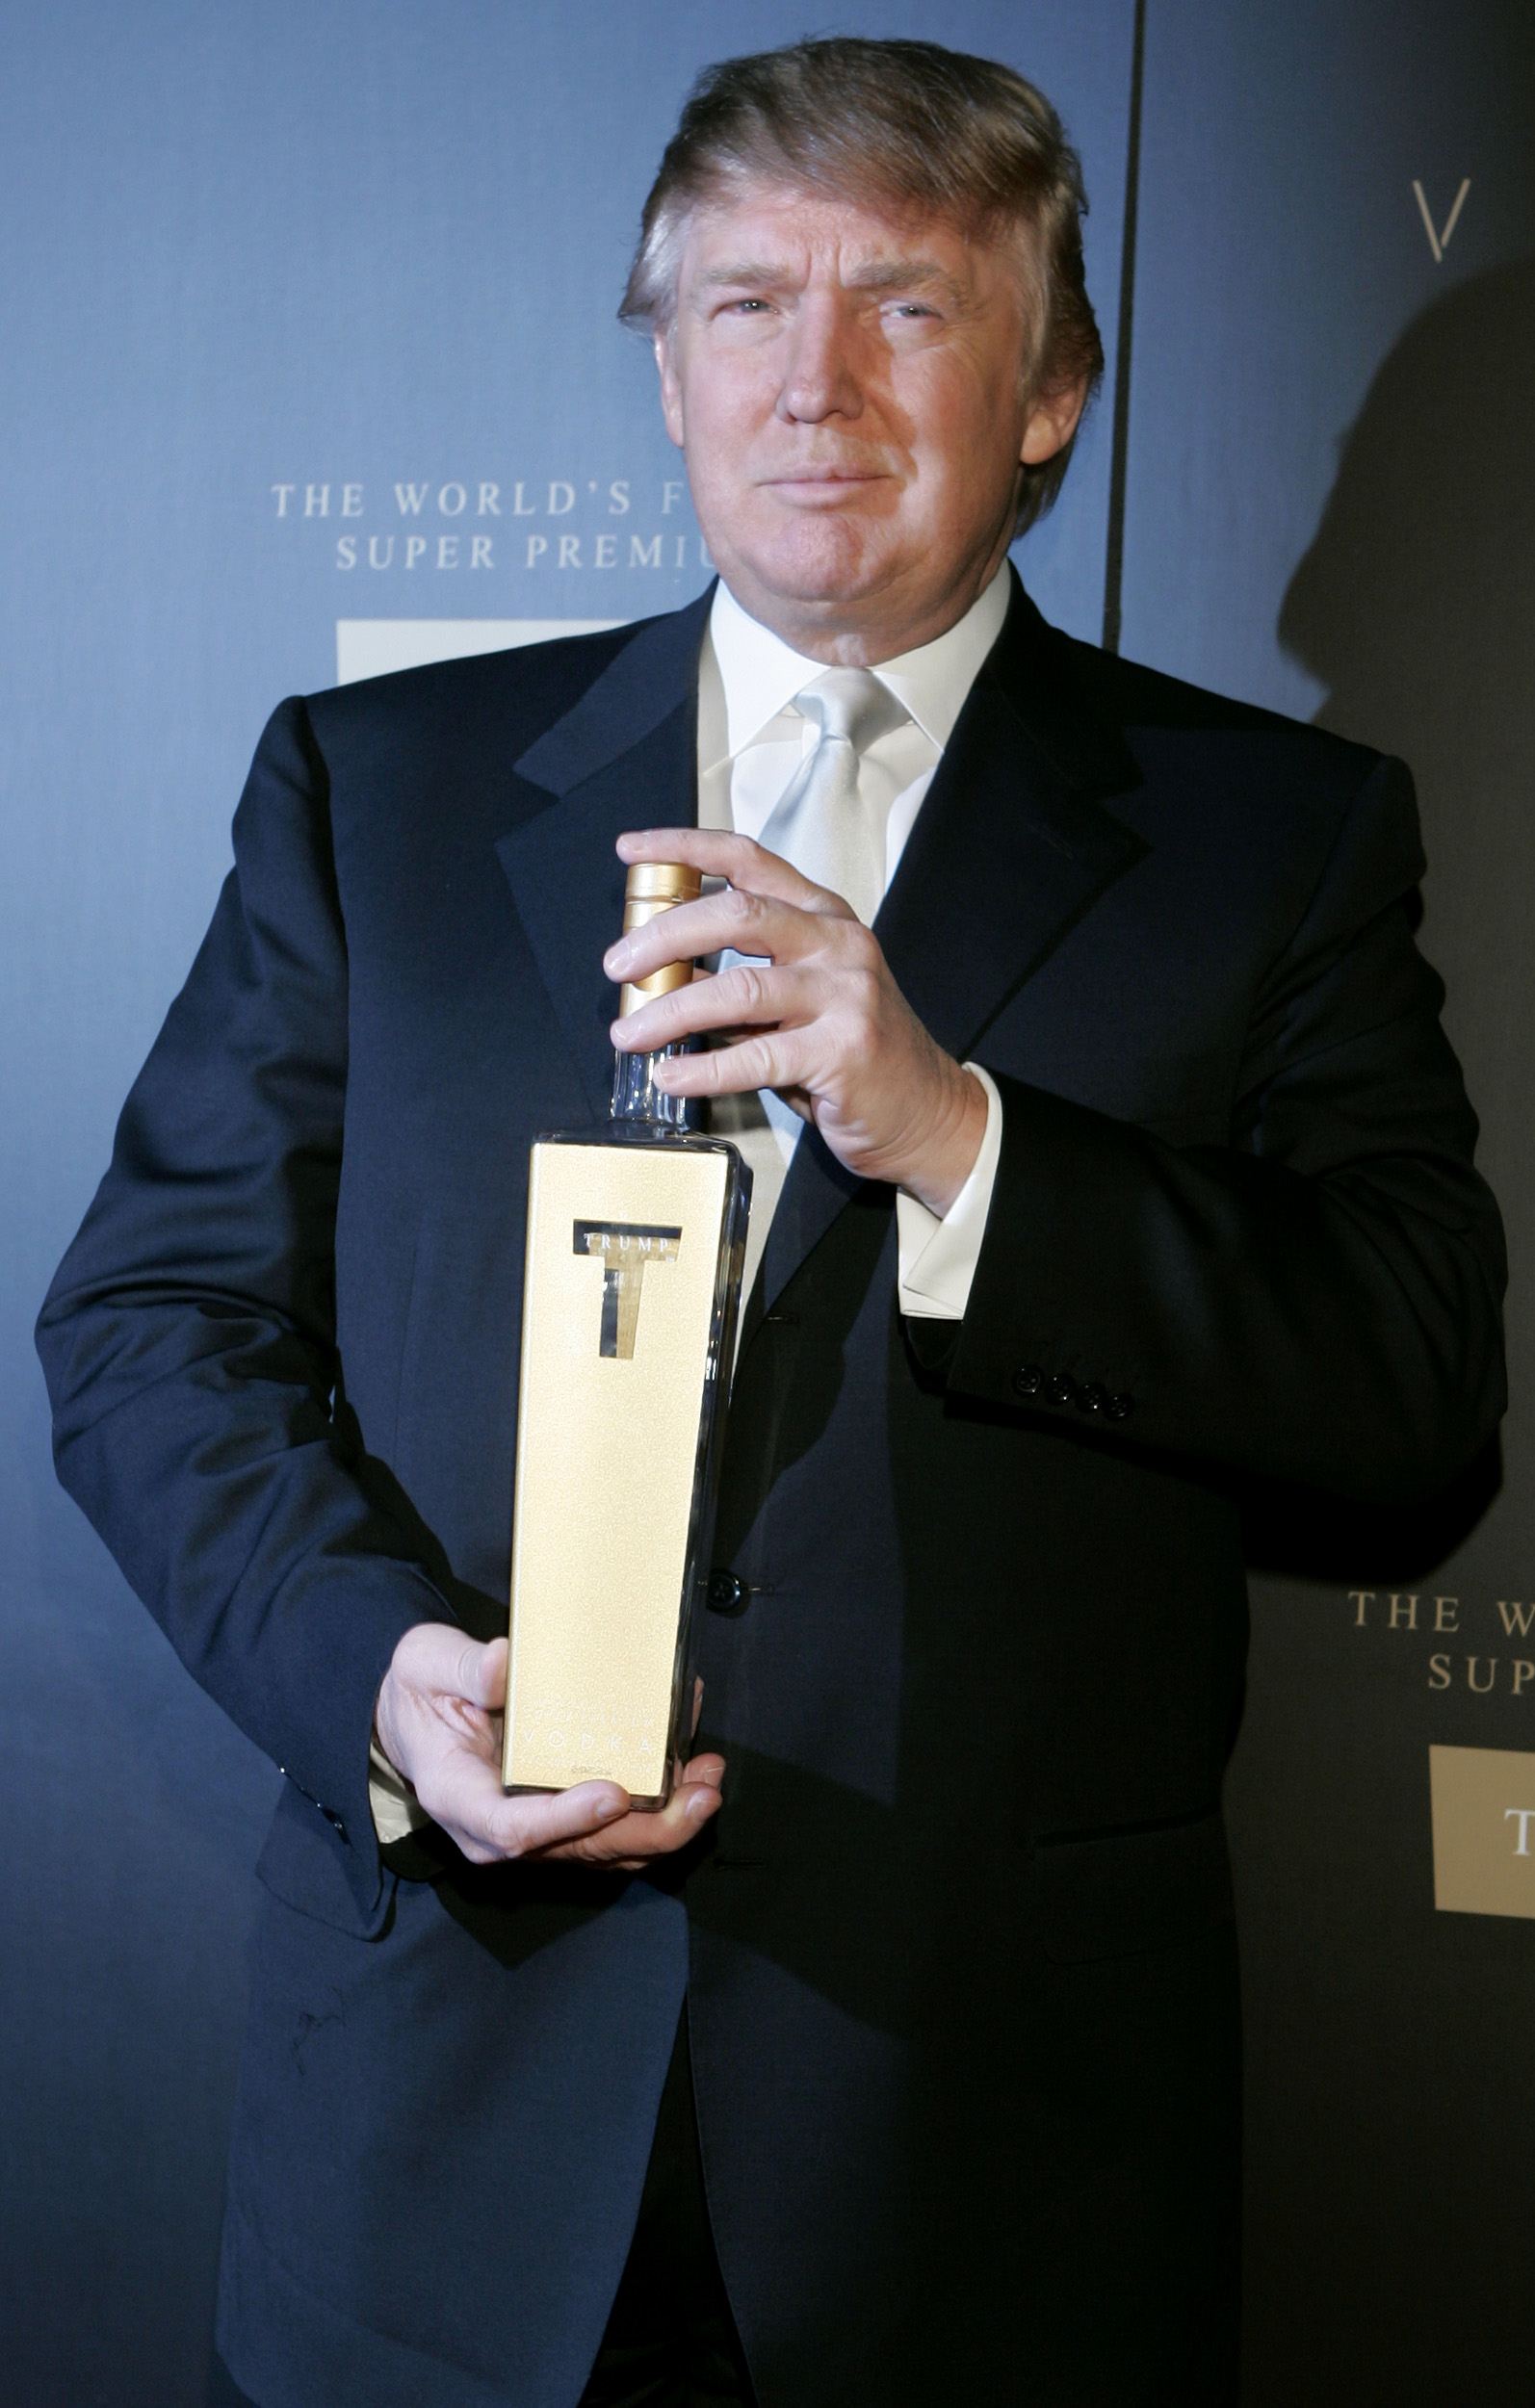 PHOTO:In this file photo, Donald Trump holds a bottle of his new line of vodka as he arrives for the Trump Vodka launch party, Jan. 17, 2007 in Los Angeles. 